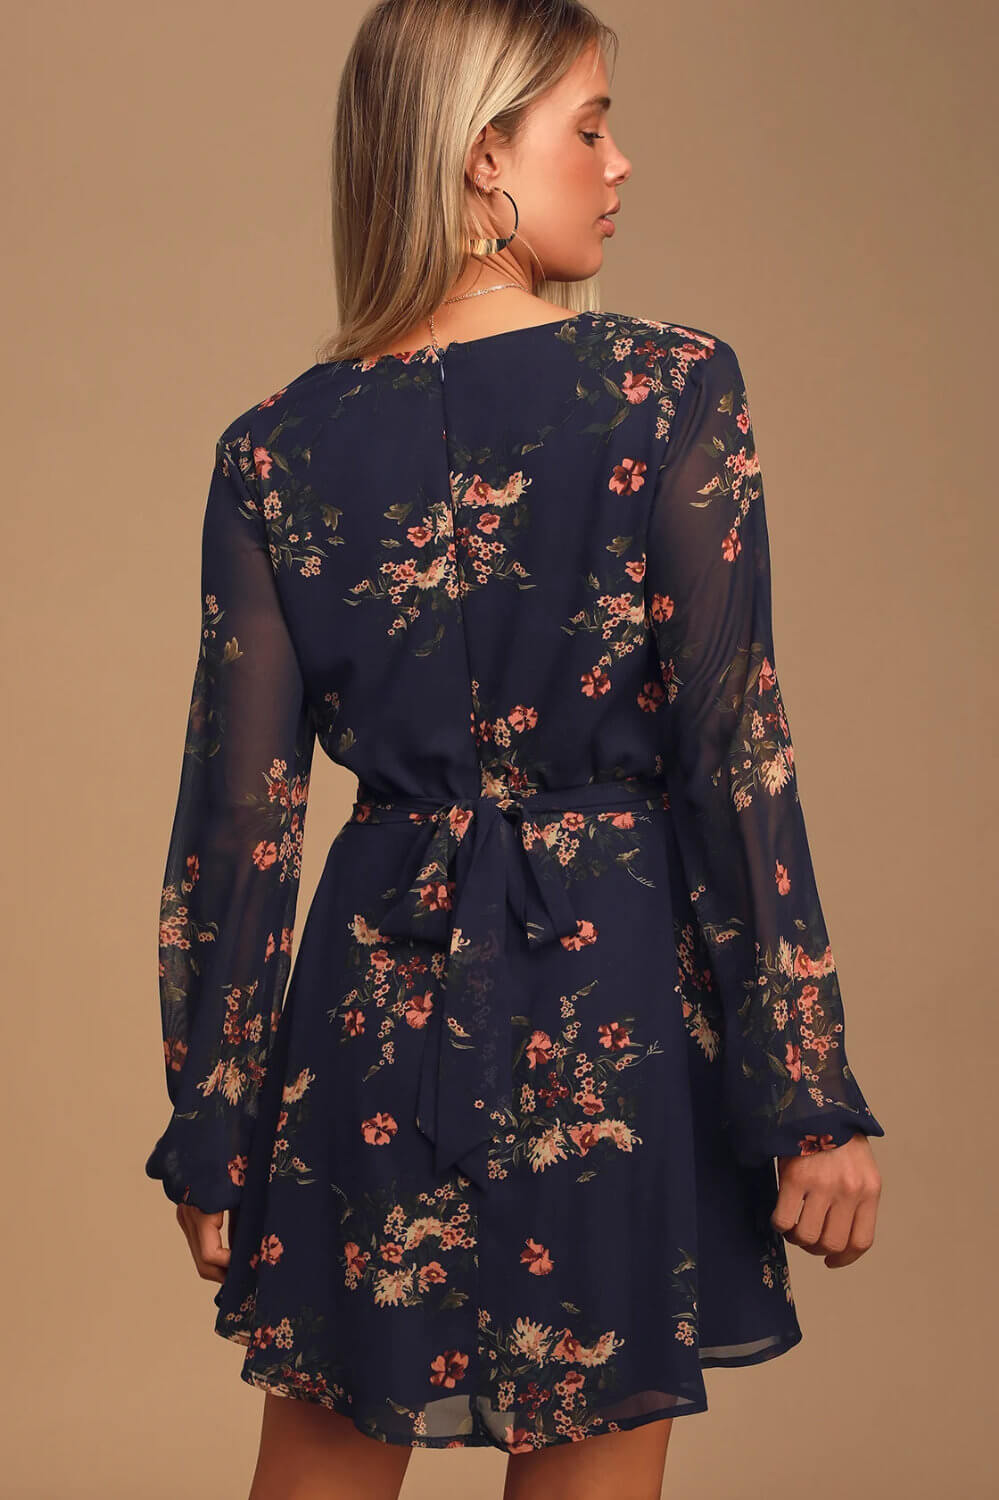 What to Wear to A Wedding as a Guest Female Navy Blue Floral Dress